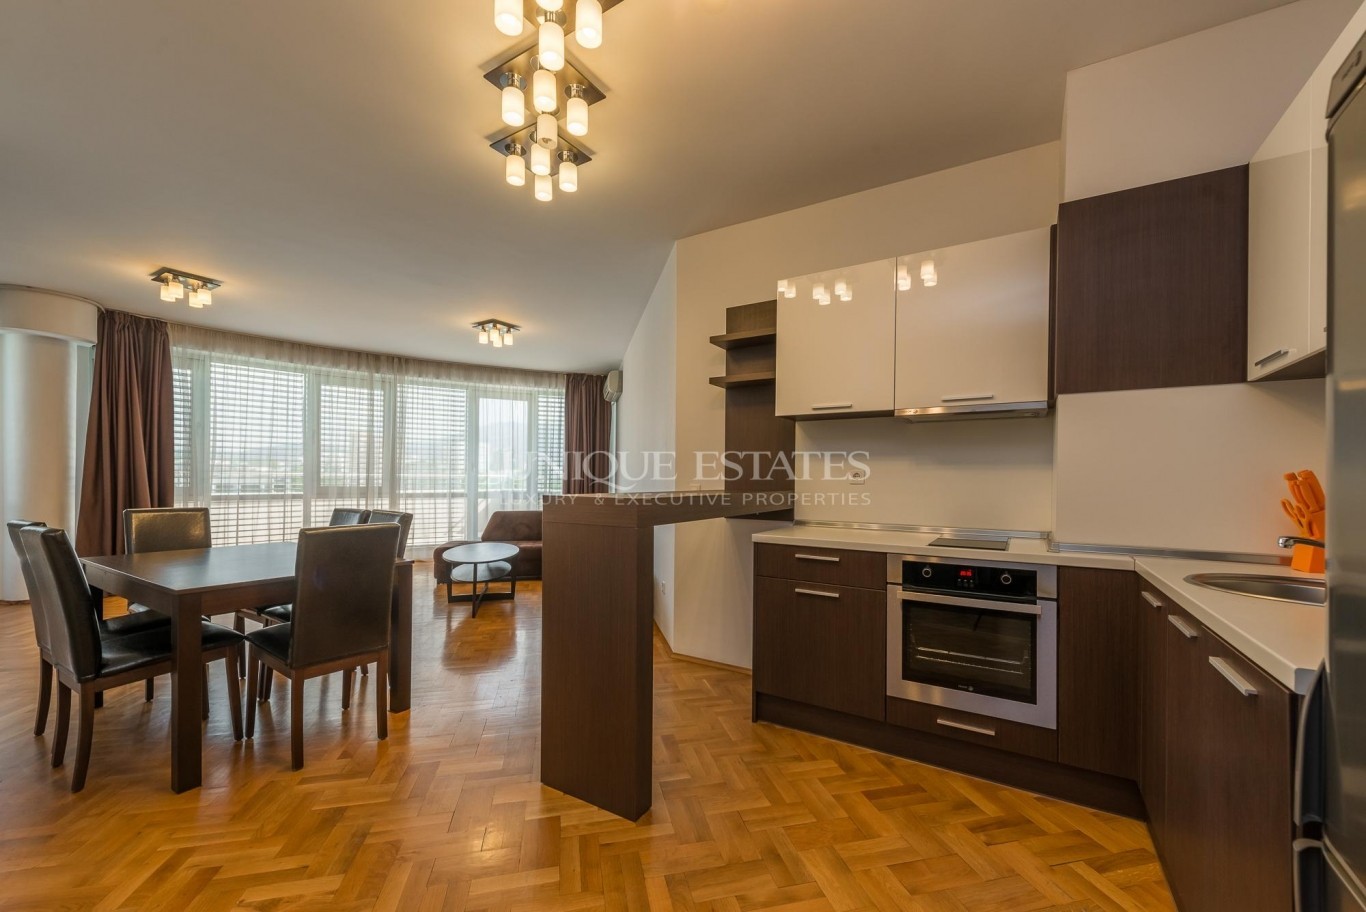 Apartment for sale in Sofia, Iztok with listing ID: K8155 - image 3